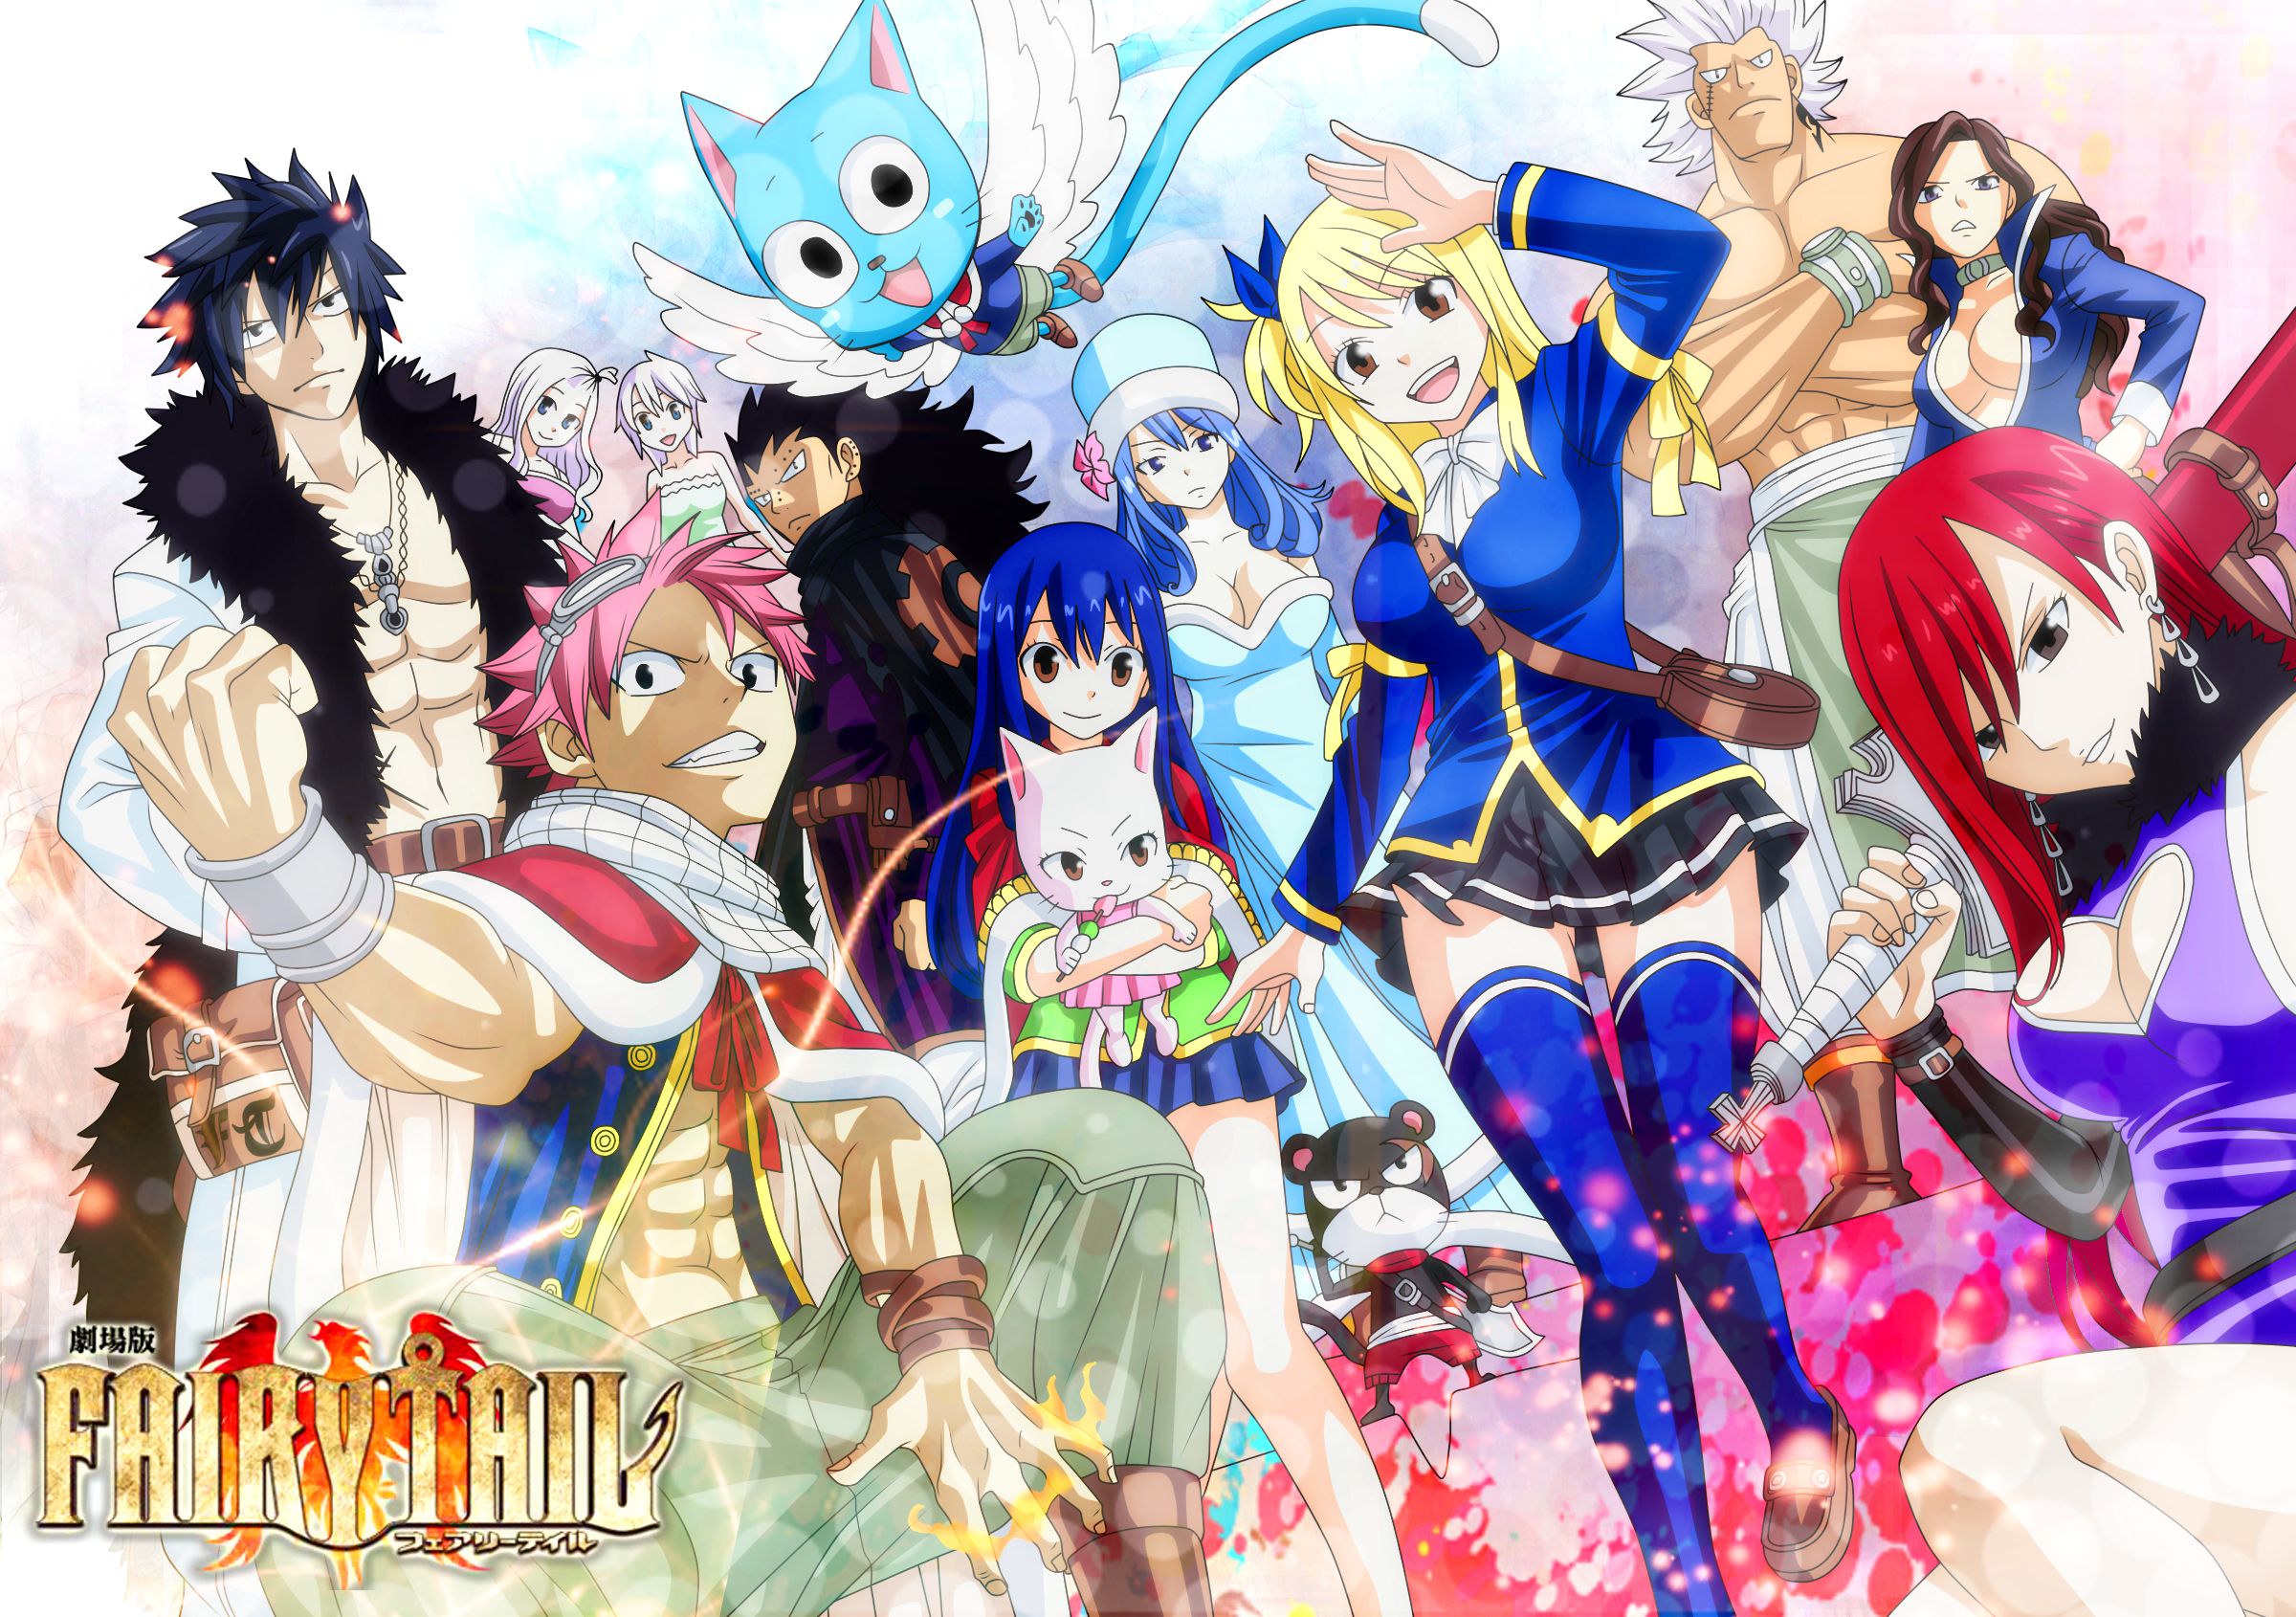 anime, fairy tail, cana alberona, charles (fairy tail), collar, earrings, elfman strauss, erza scarlet, gajeel redfox, gray fullbuster, happy (fairy tail), hat, juvia lockser, lisanna strauss, lucy heartfilia, mirajane strauss, natsu dragneel, panther lily (fairy tail), skirt, smile, sword, thigh highs, weapon, wendy marvell 4K Ultra